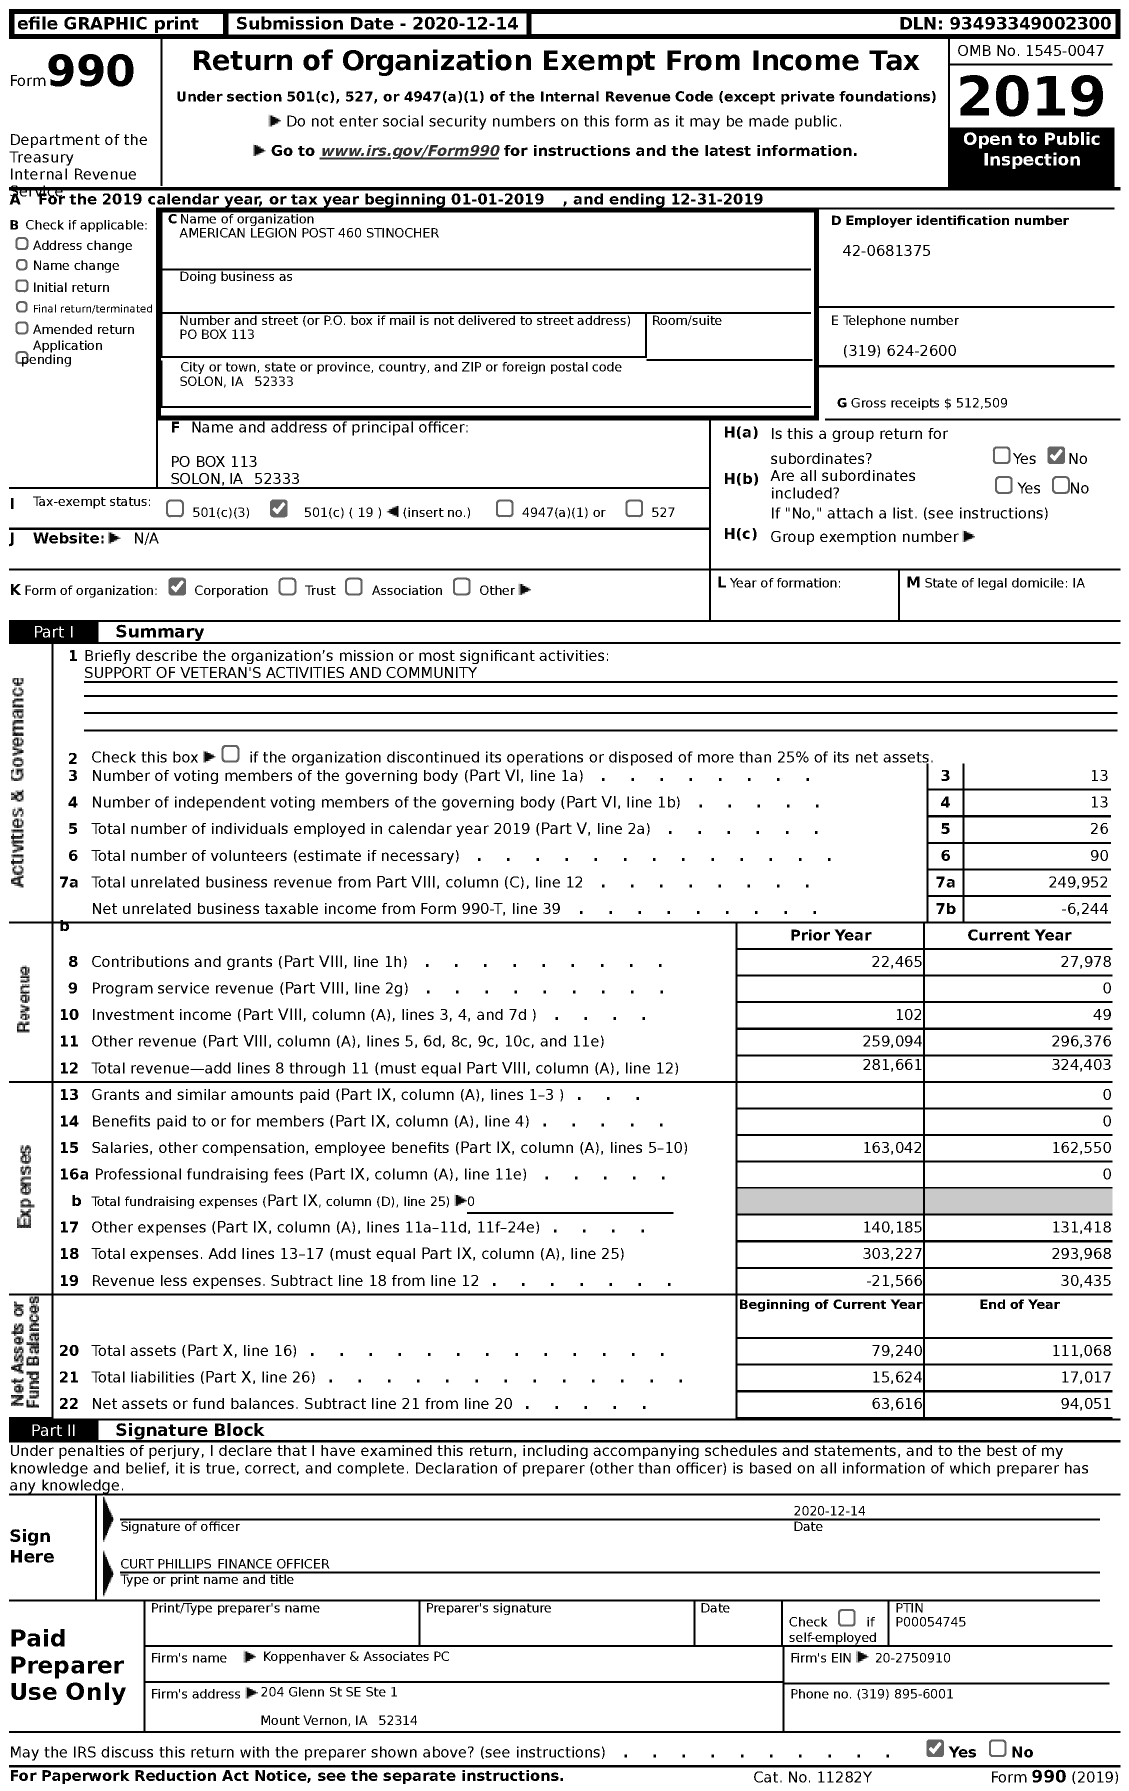 Image of first page of 2019 Form 990 for American Legion - 0460 Stinocher